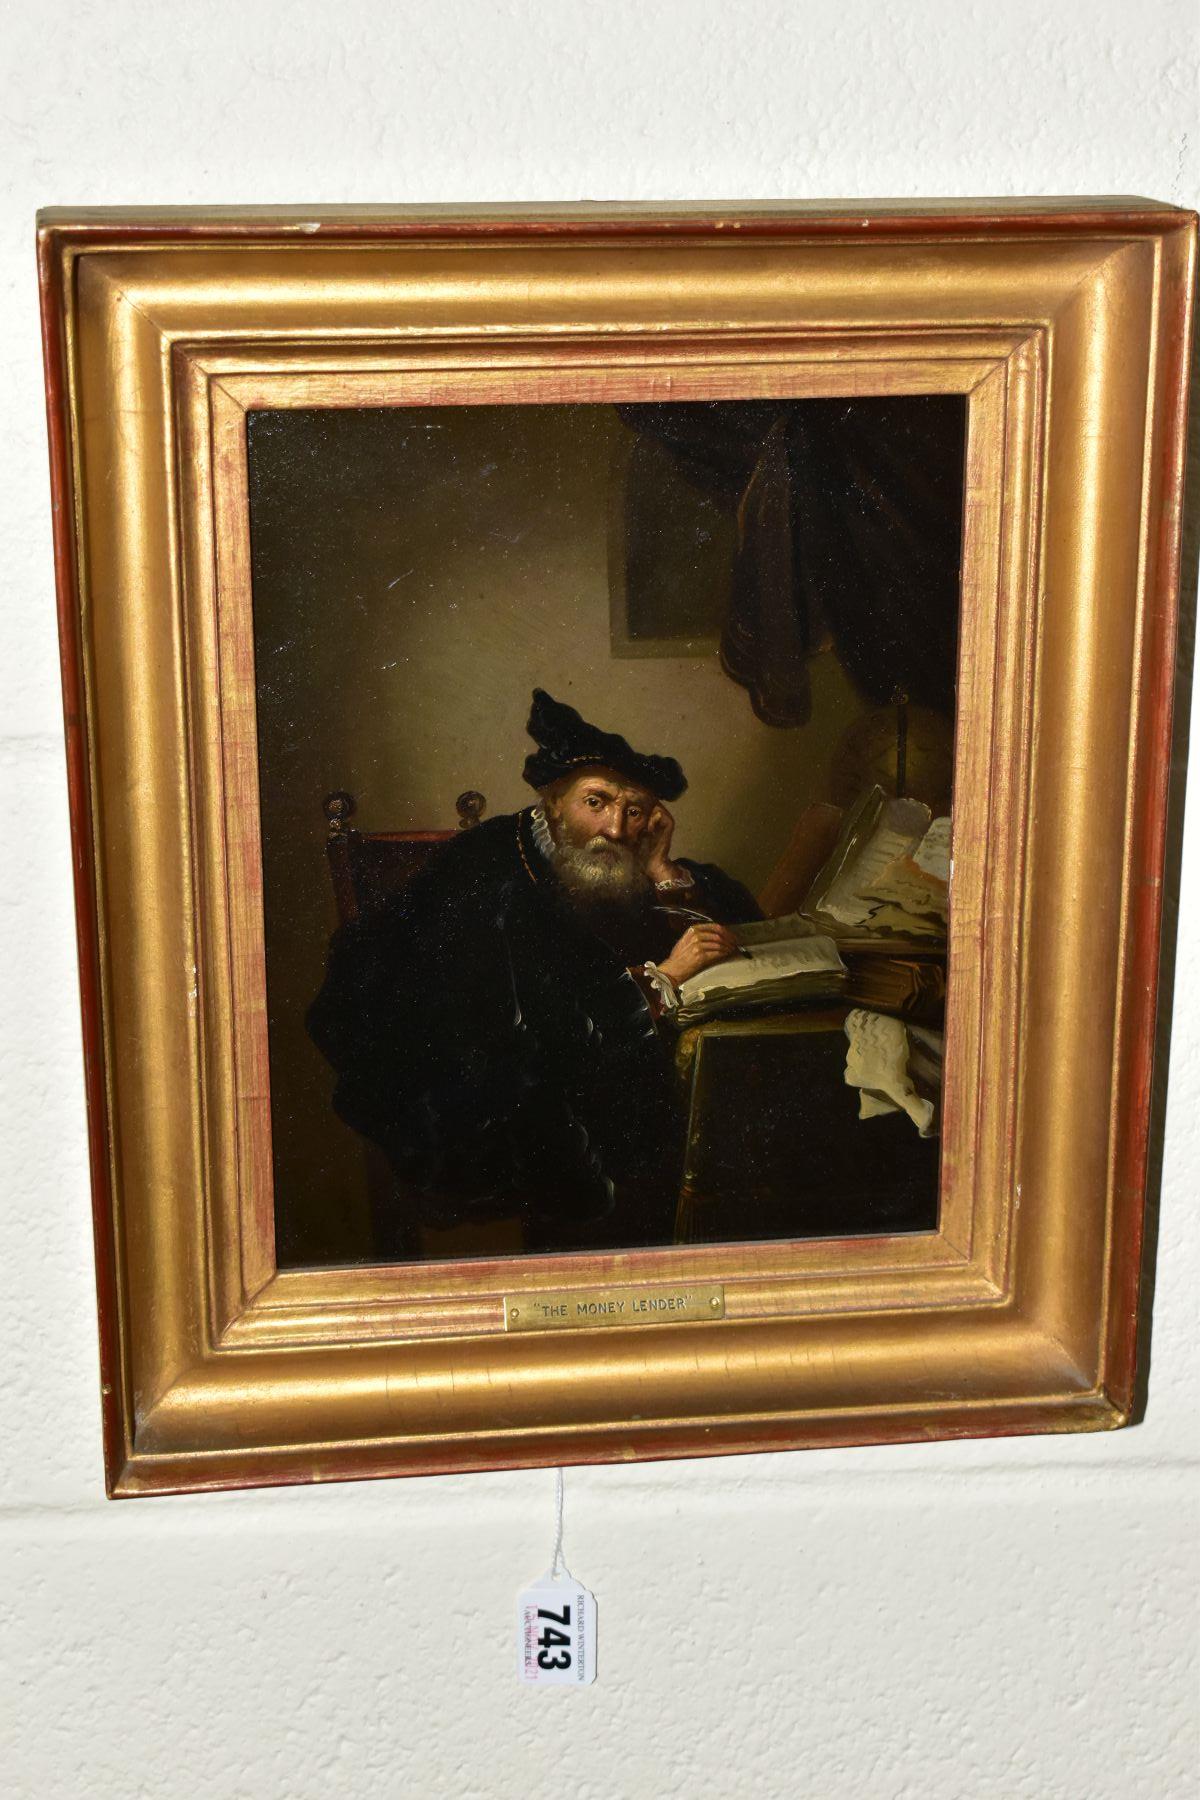 19TH CENTURY CONTINENTAL SCHOOL 'THE MONEY LENDER', a seated portrait of an elderly gentleman who is